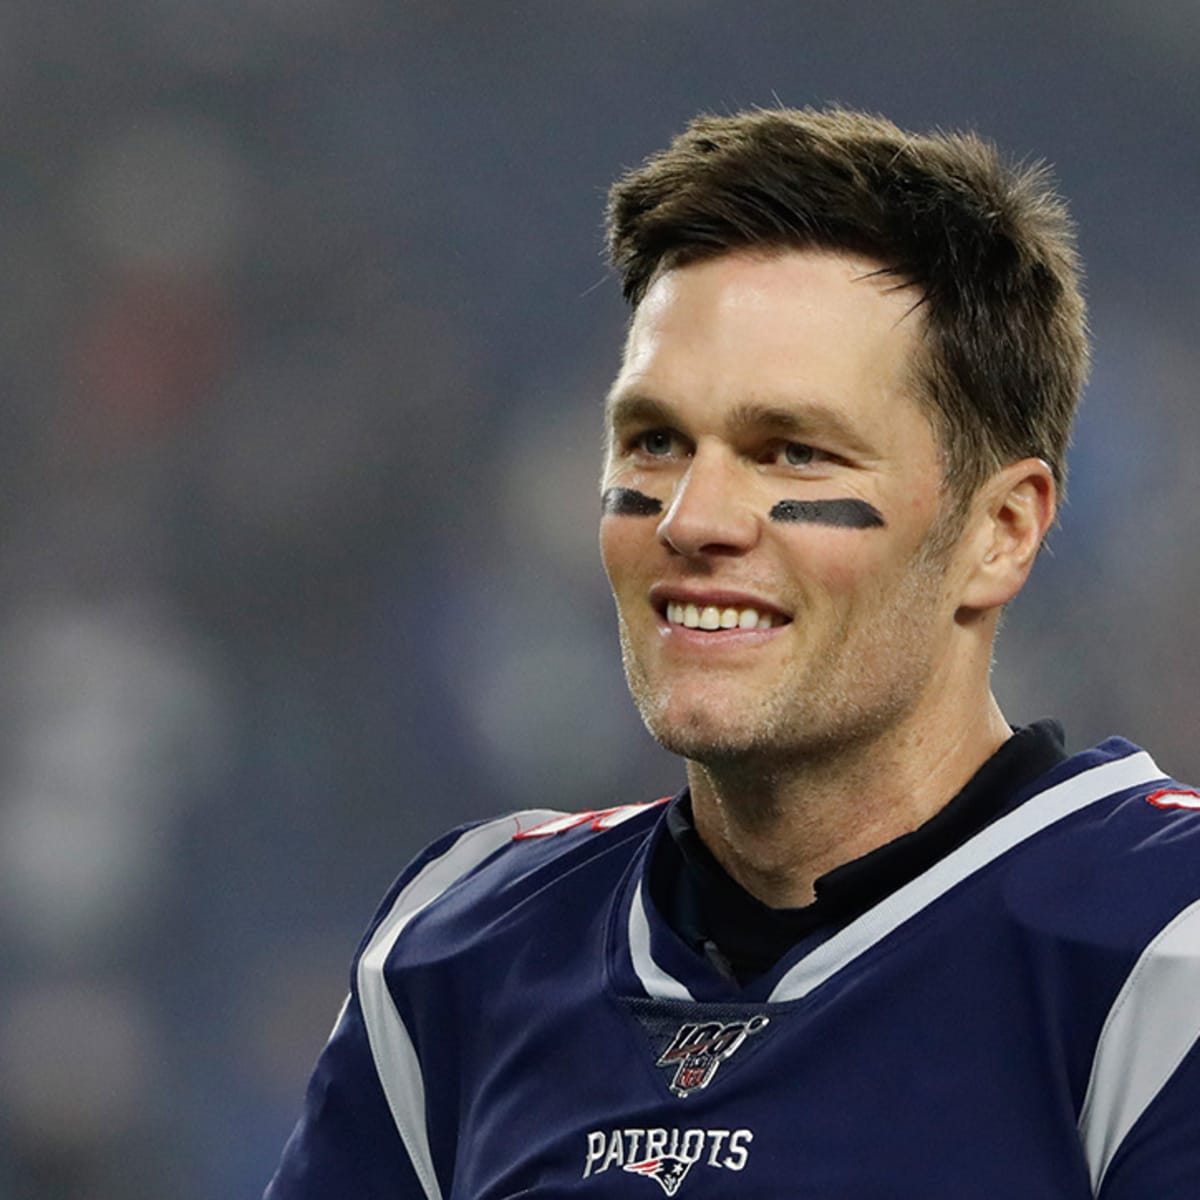 Tom Brady launches production company as free agency choice looms